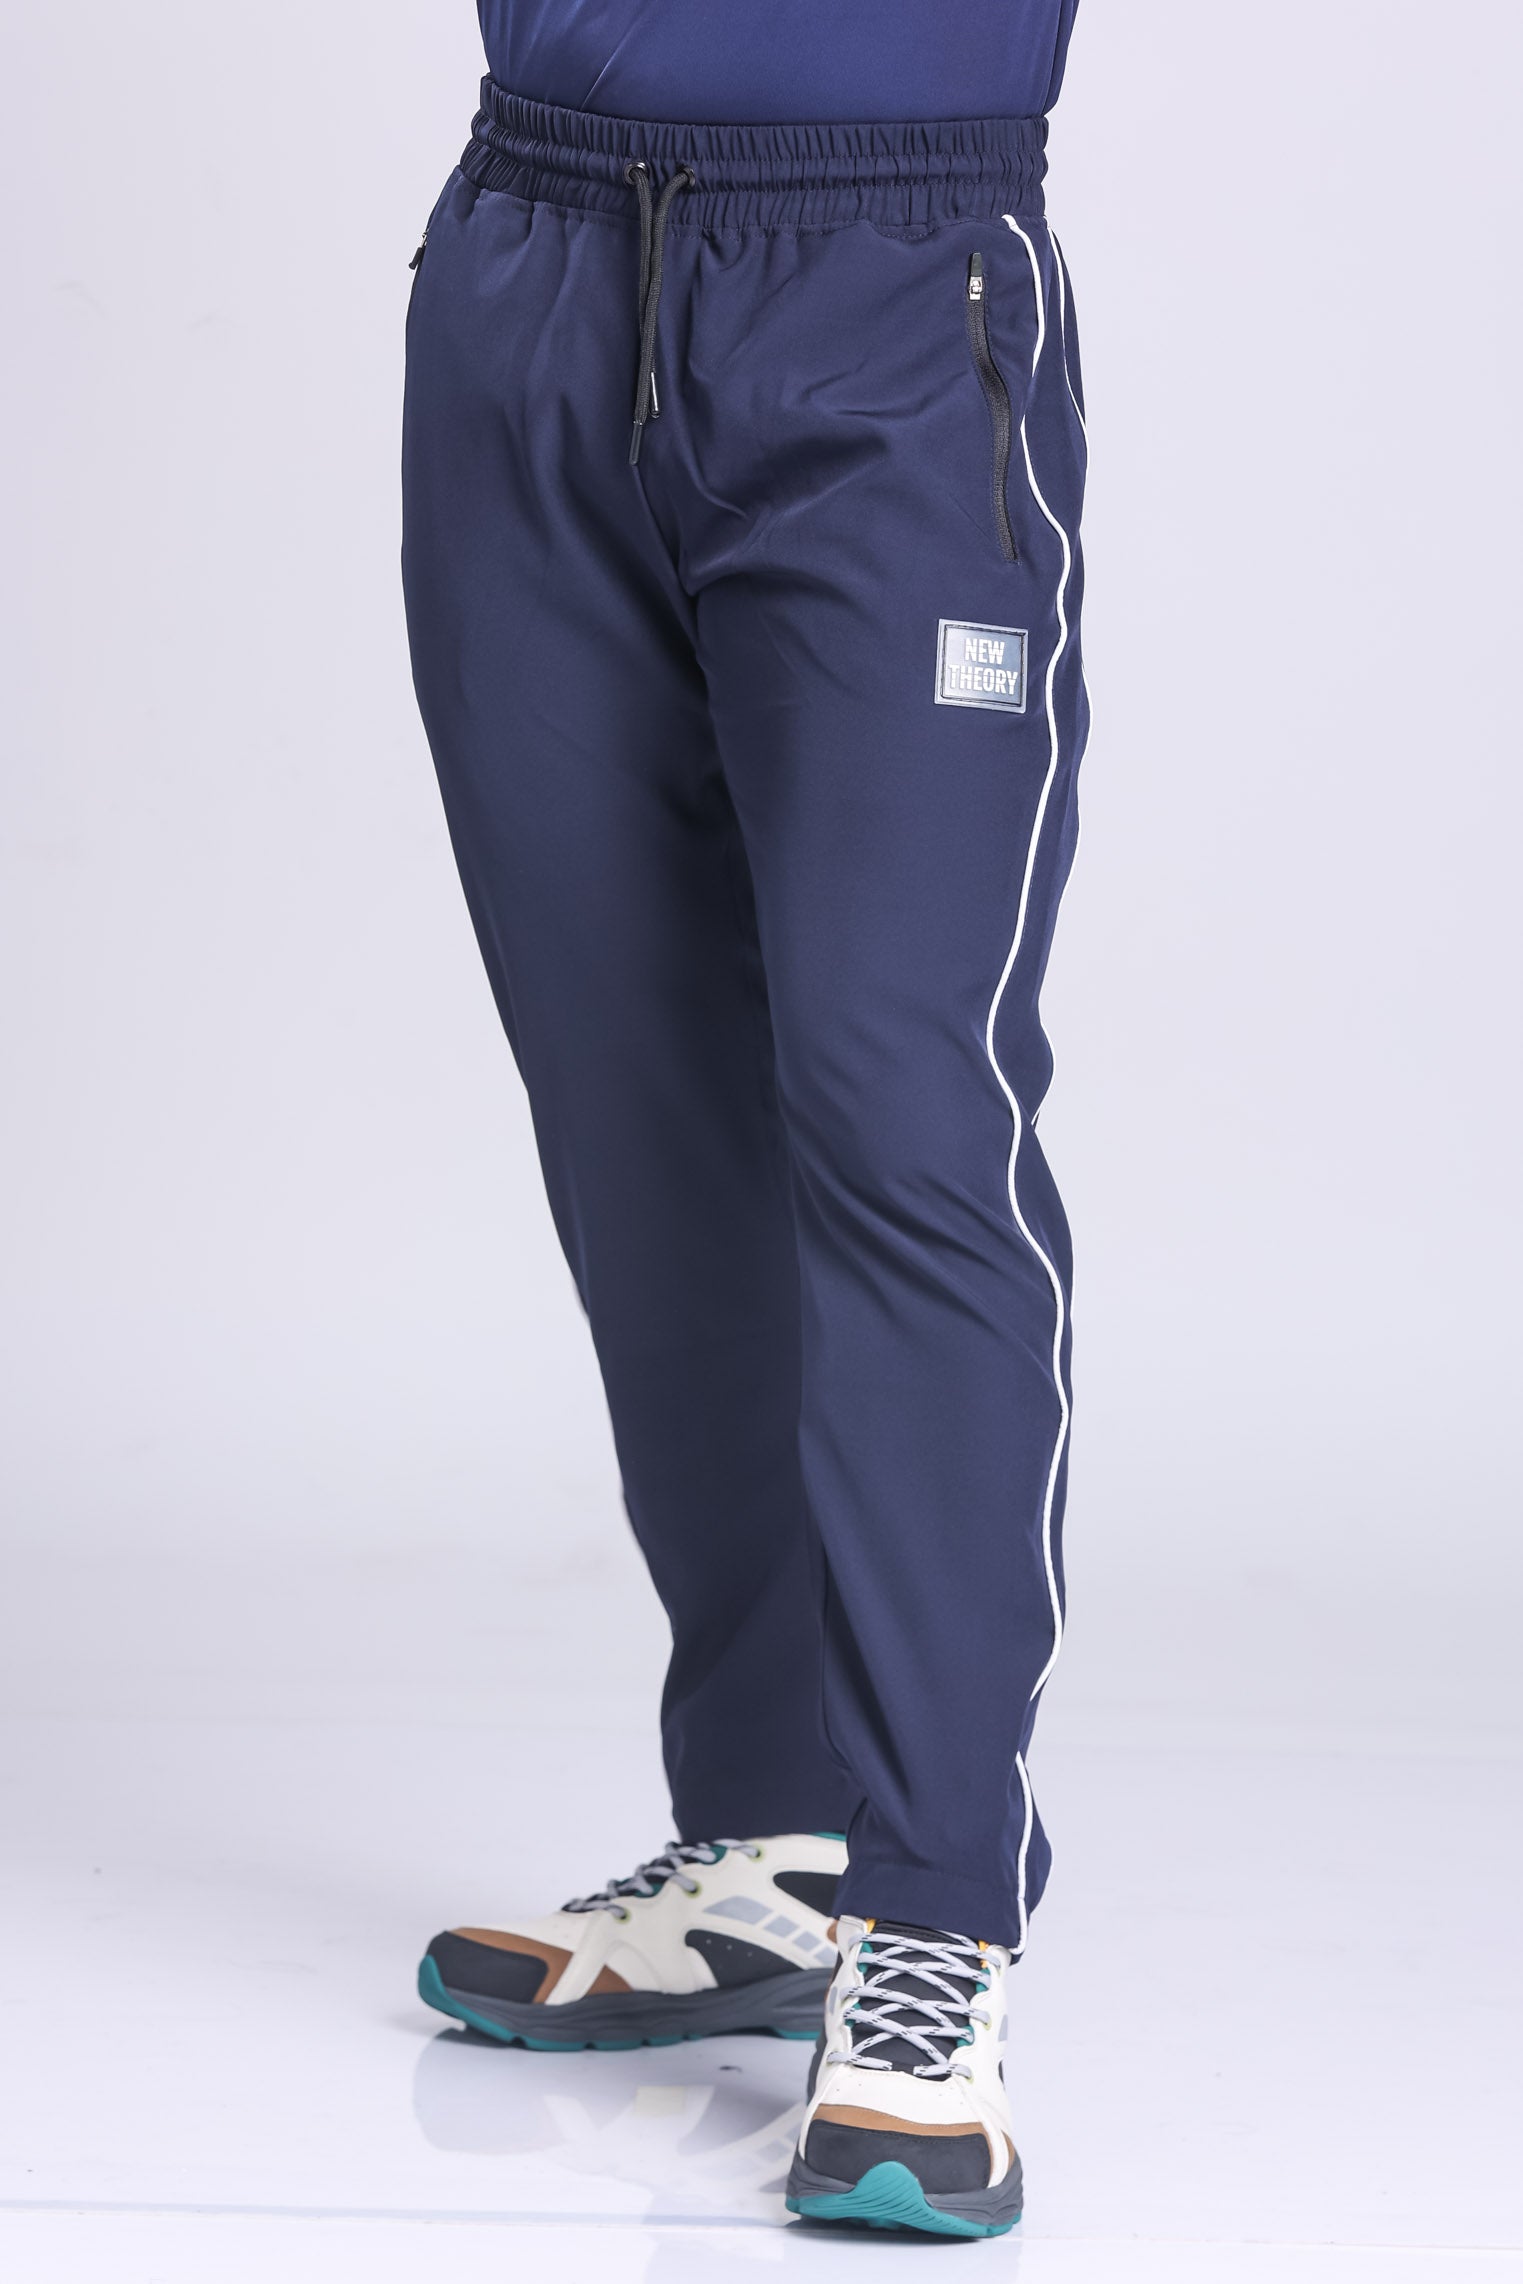 Shop for Nike Track Pants Online at Best Price